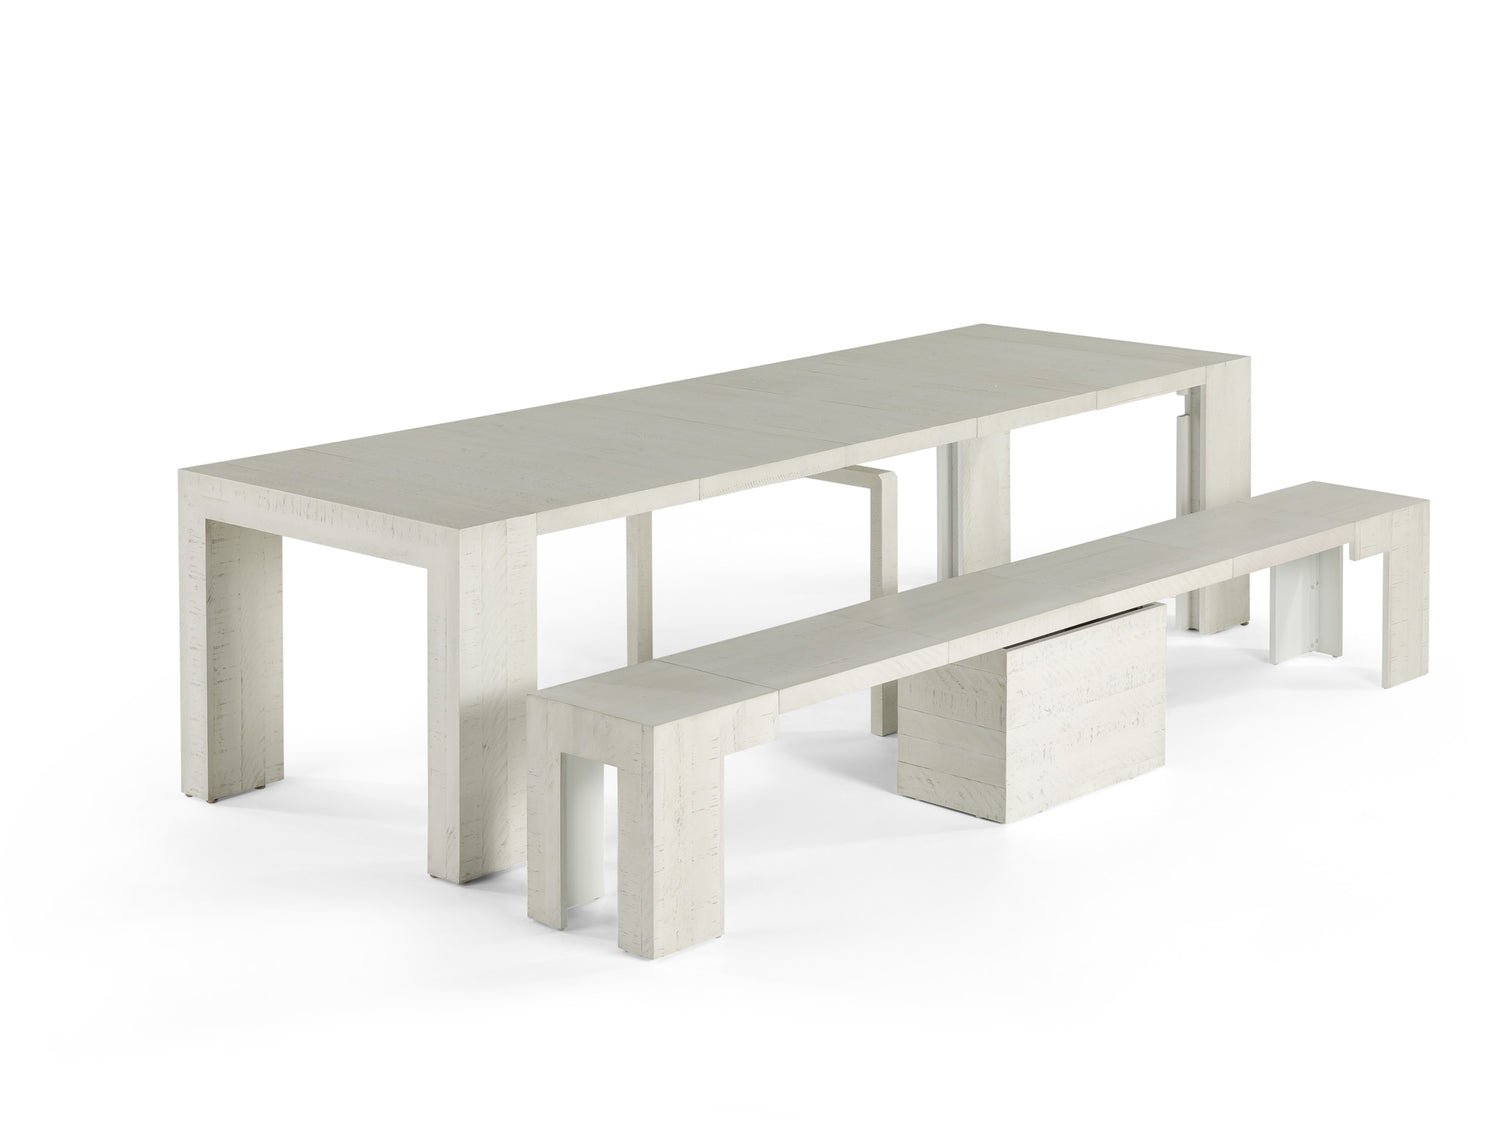 Canadian Birch::Gallery::Expanded Canadian Birch Transformer Table Shown with Bench